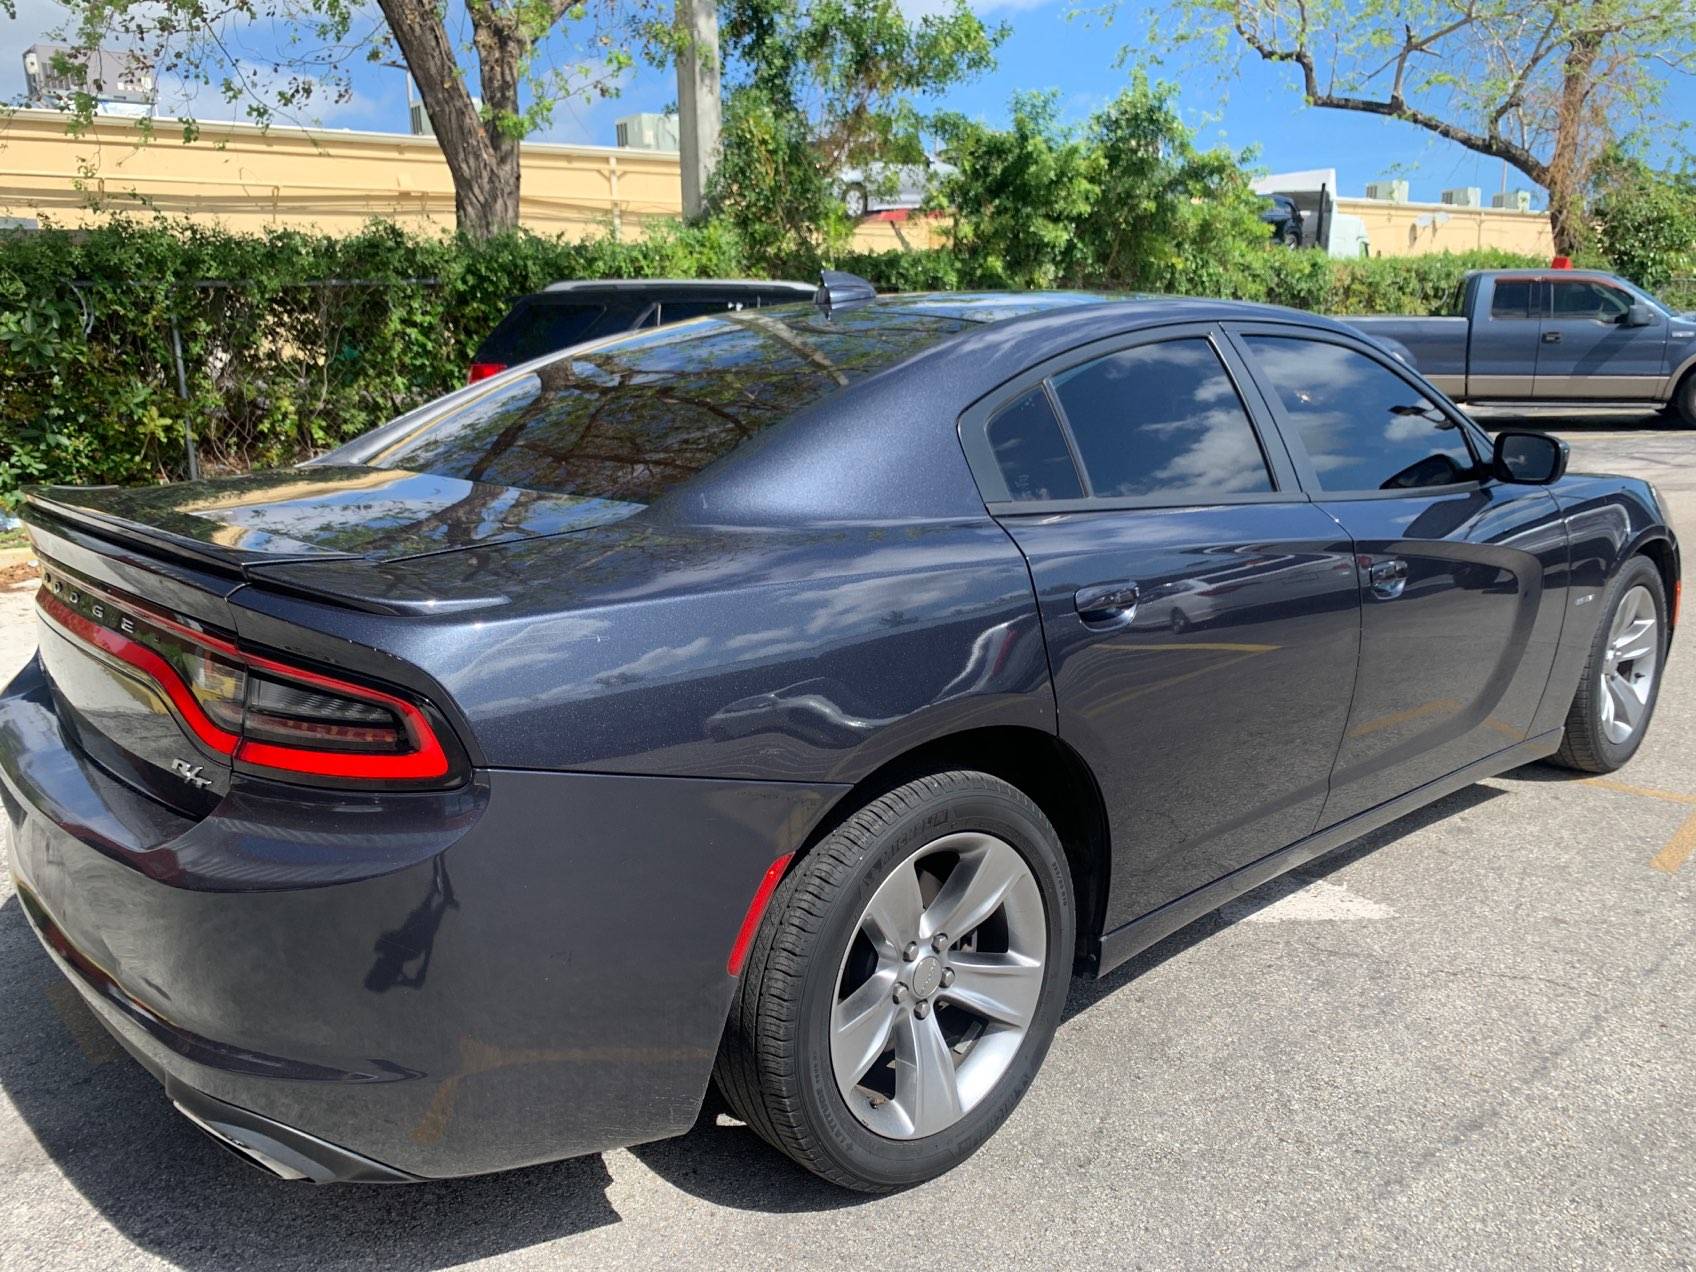 Florida Fine Cars - Used Dodge Charger 2016 MIAMI R/T